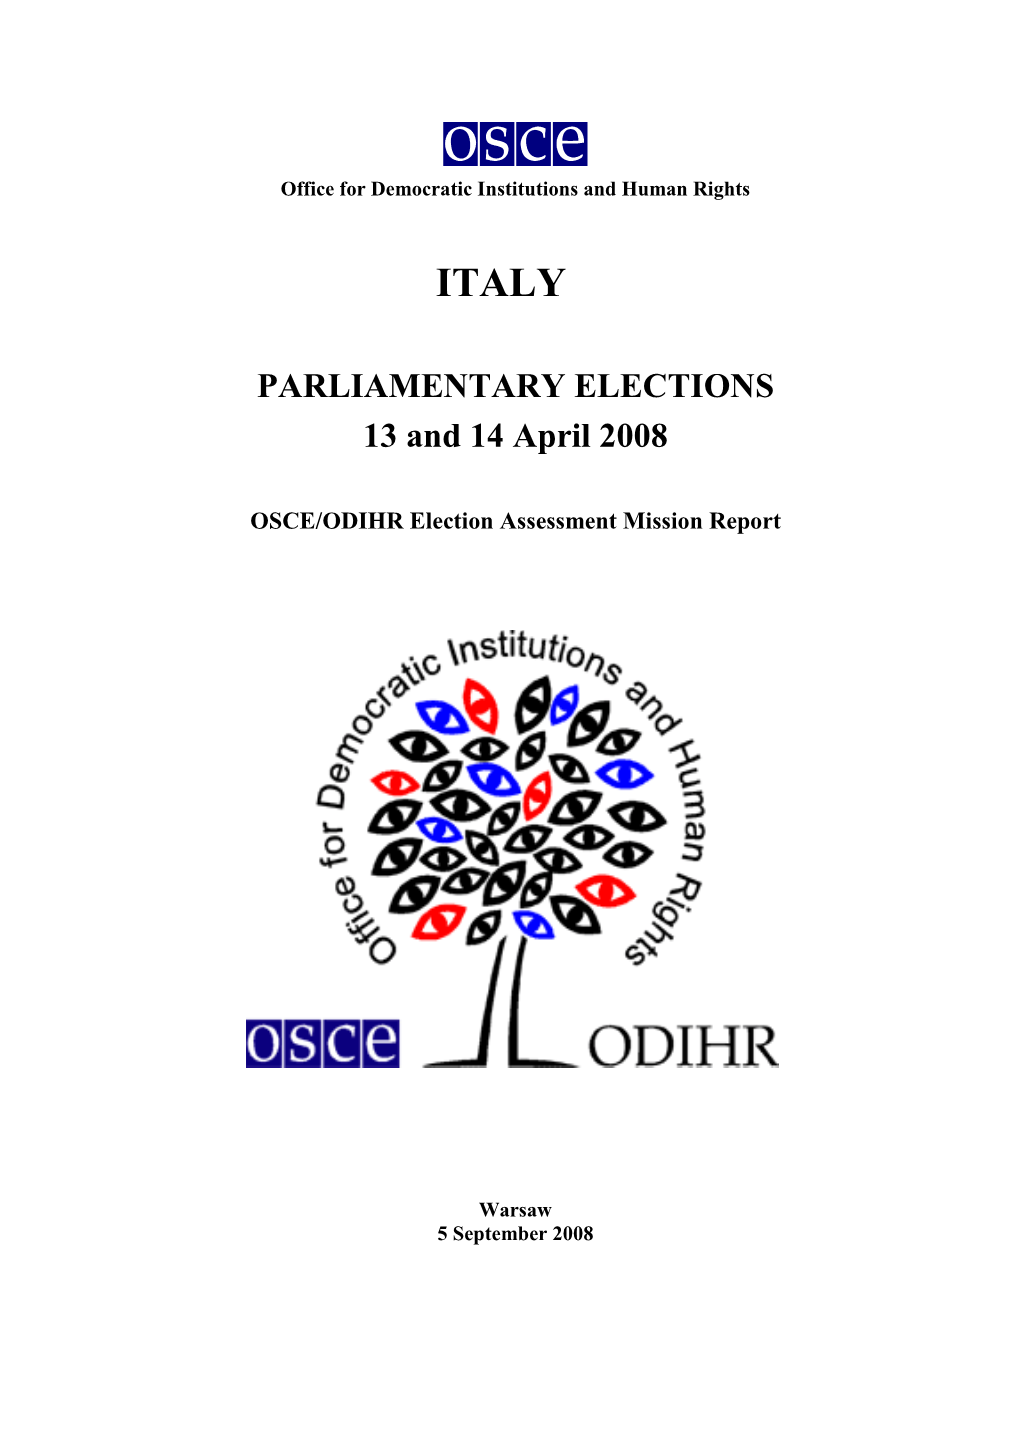 PARLIAMENTARY ELECTIONS 13 and 14 April 2008